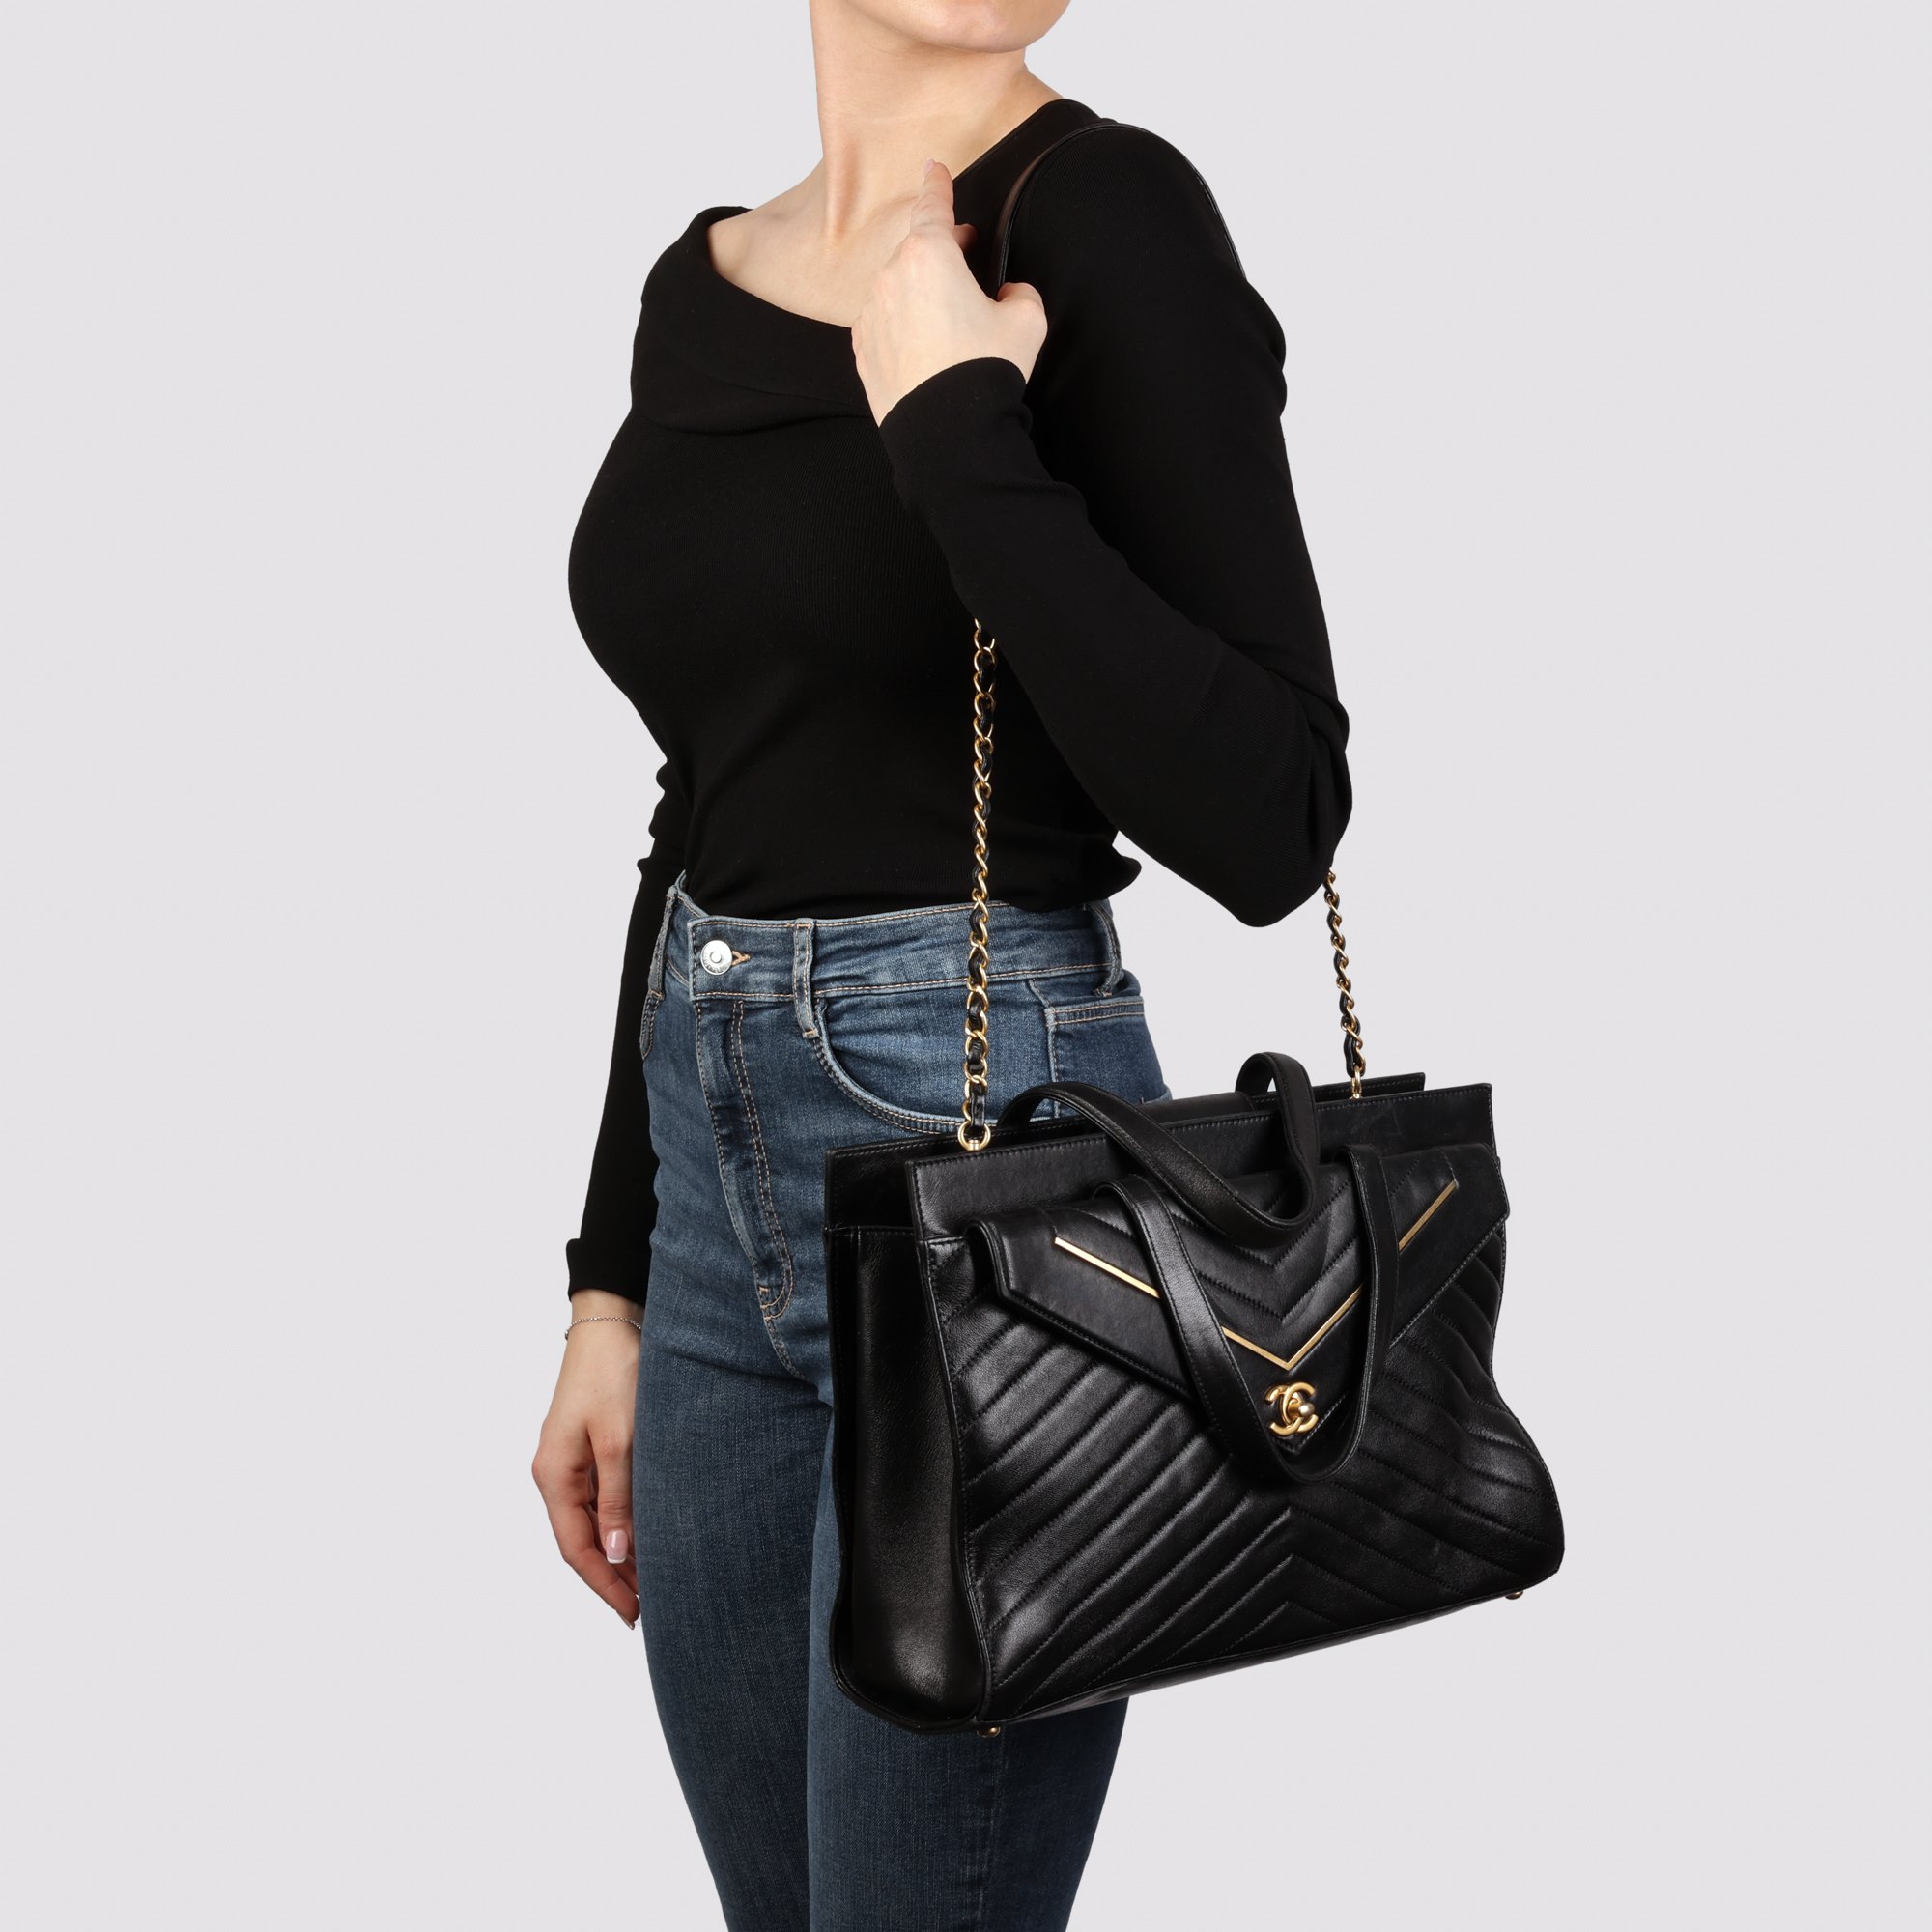 Chanel Black Chevron Quilted Lambskin Classic Shoulder Tote